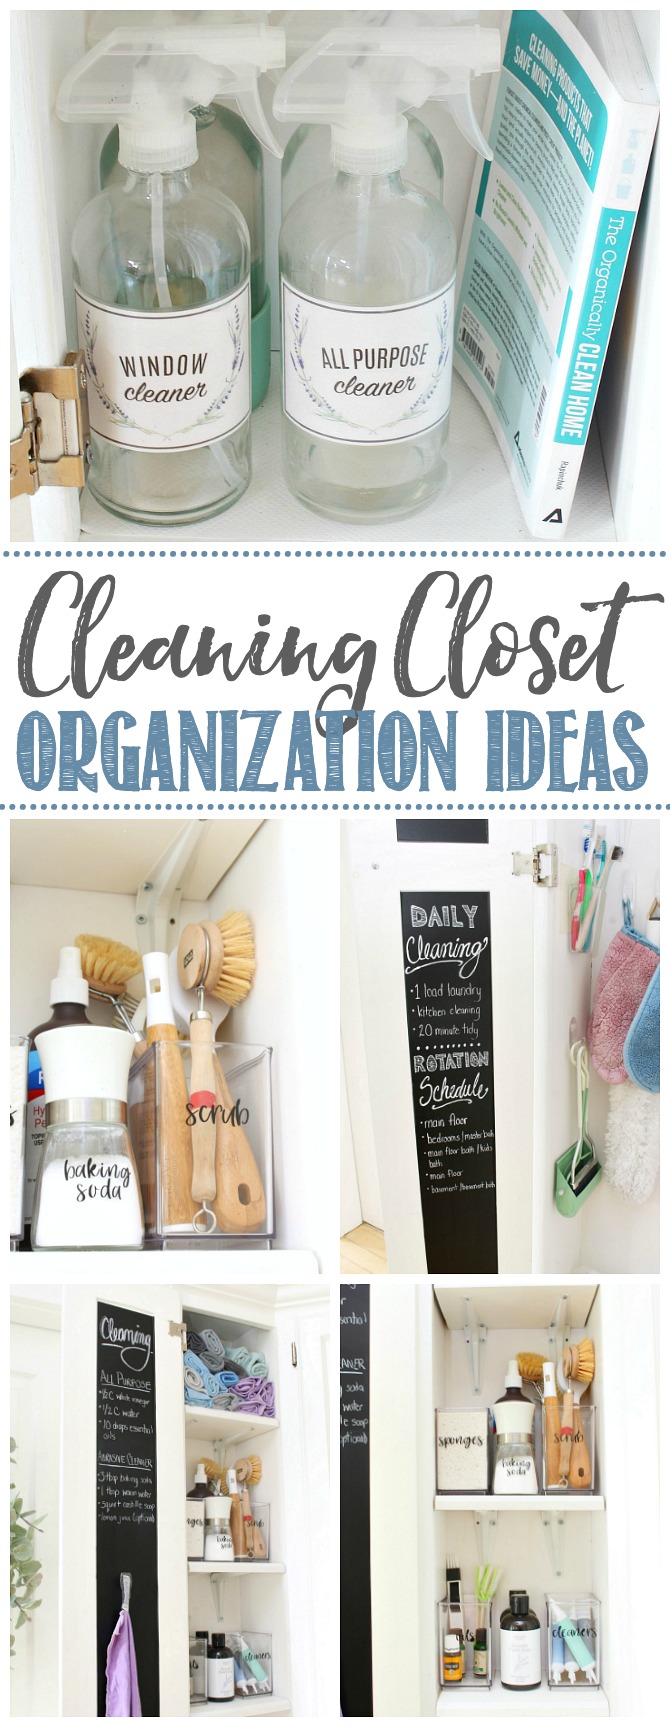 https://www.cleanandscentsible.com/wp-content/uploads/2020/08/Cleaning-closet-organization-ideas-title-1.jpg